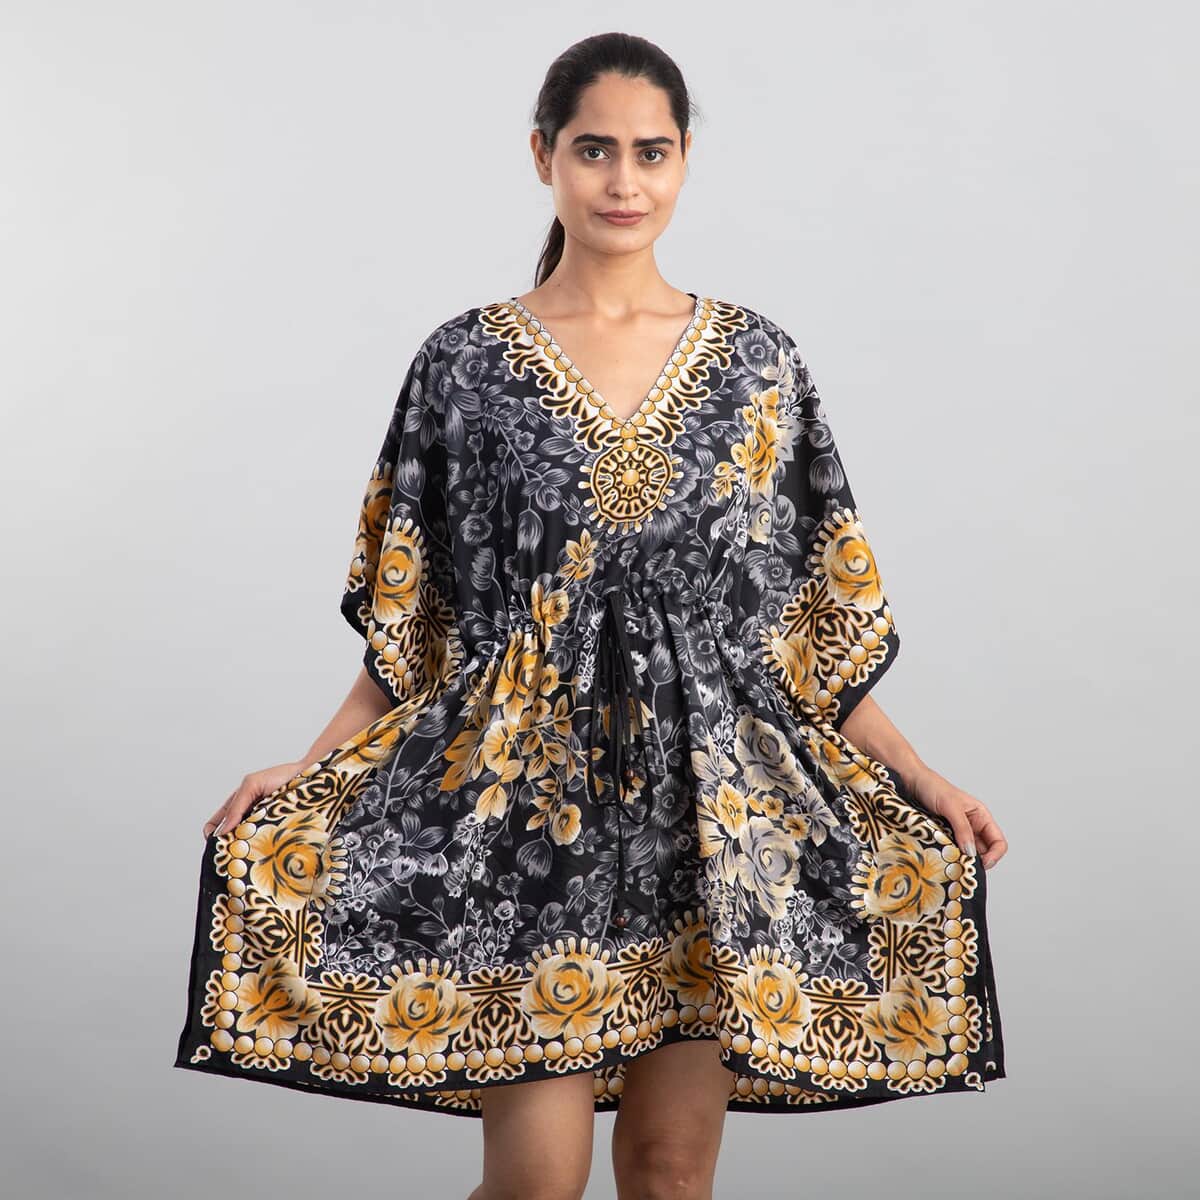 TAMSY Gray Floral Print 100% Polyester V-neck Kaftan with Pockets - One Size Fits Most (36"x41") image number 2